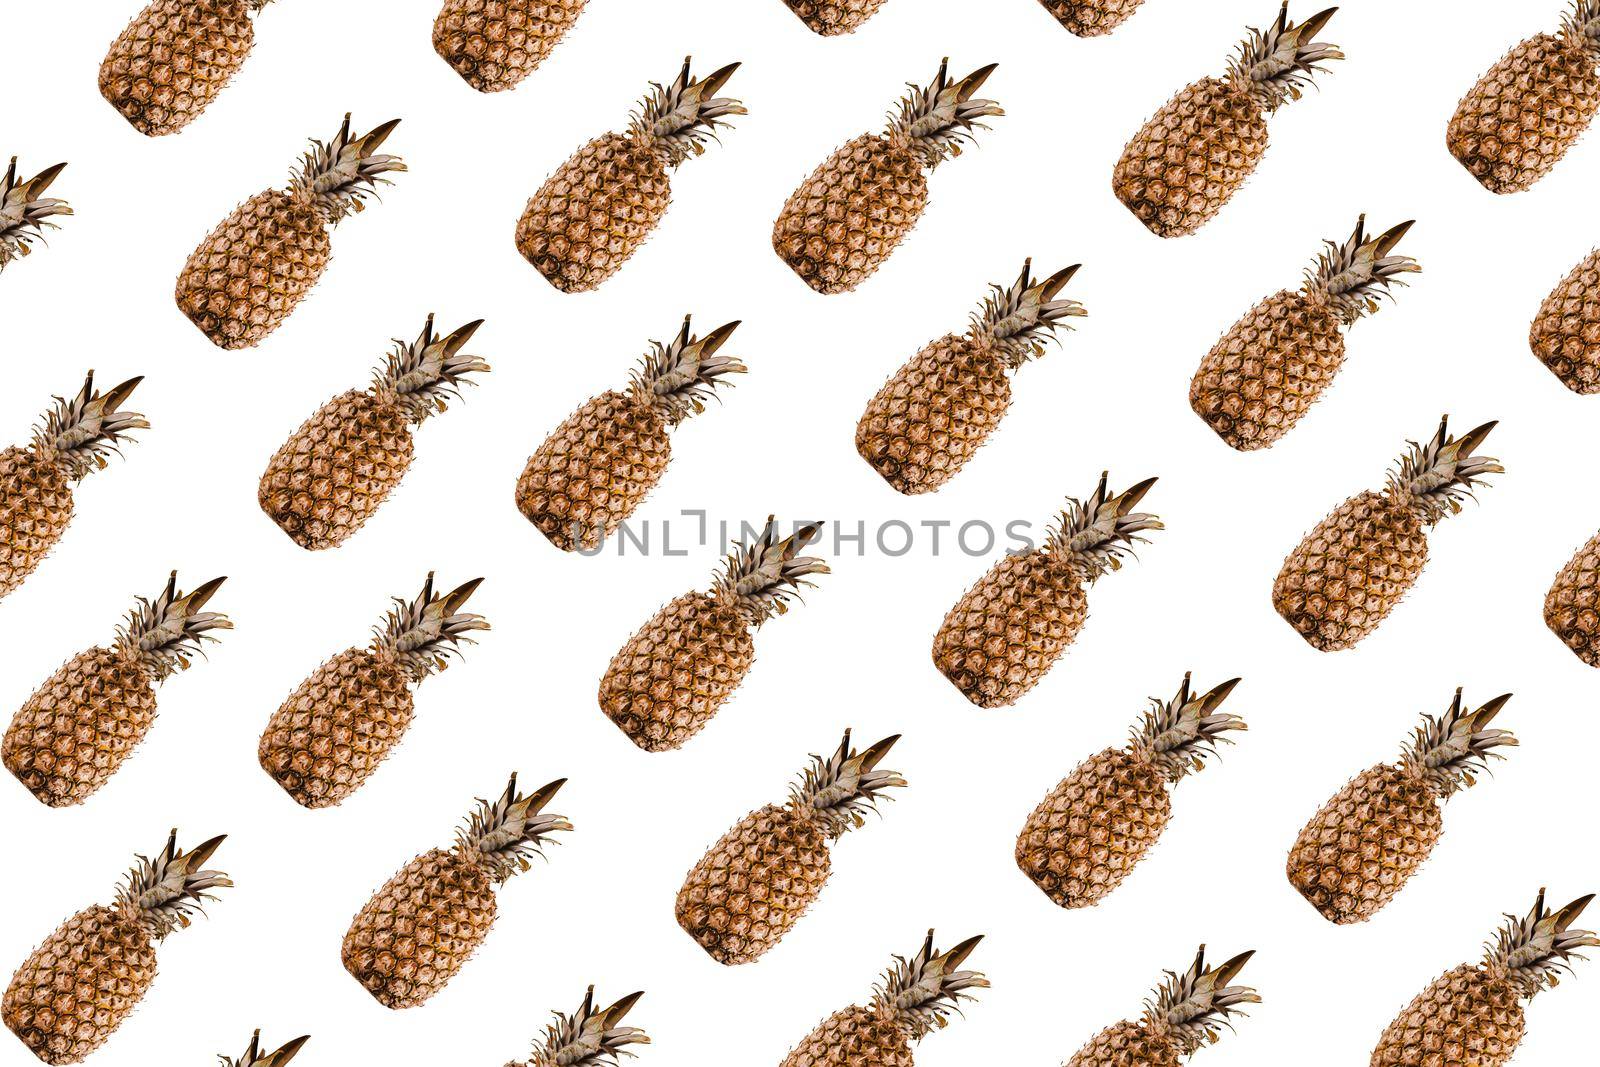 Pineapple pattern mix of tropical citrus fruits on white background.